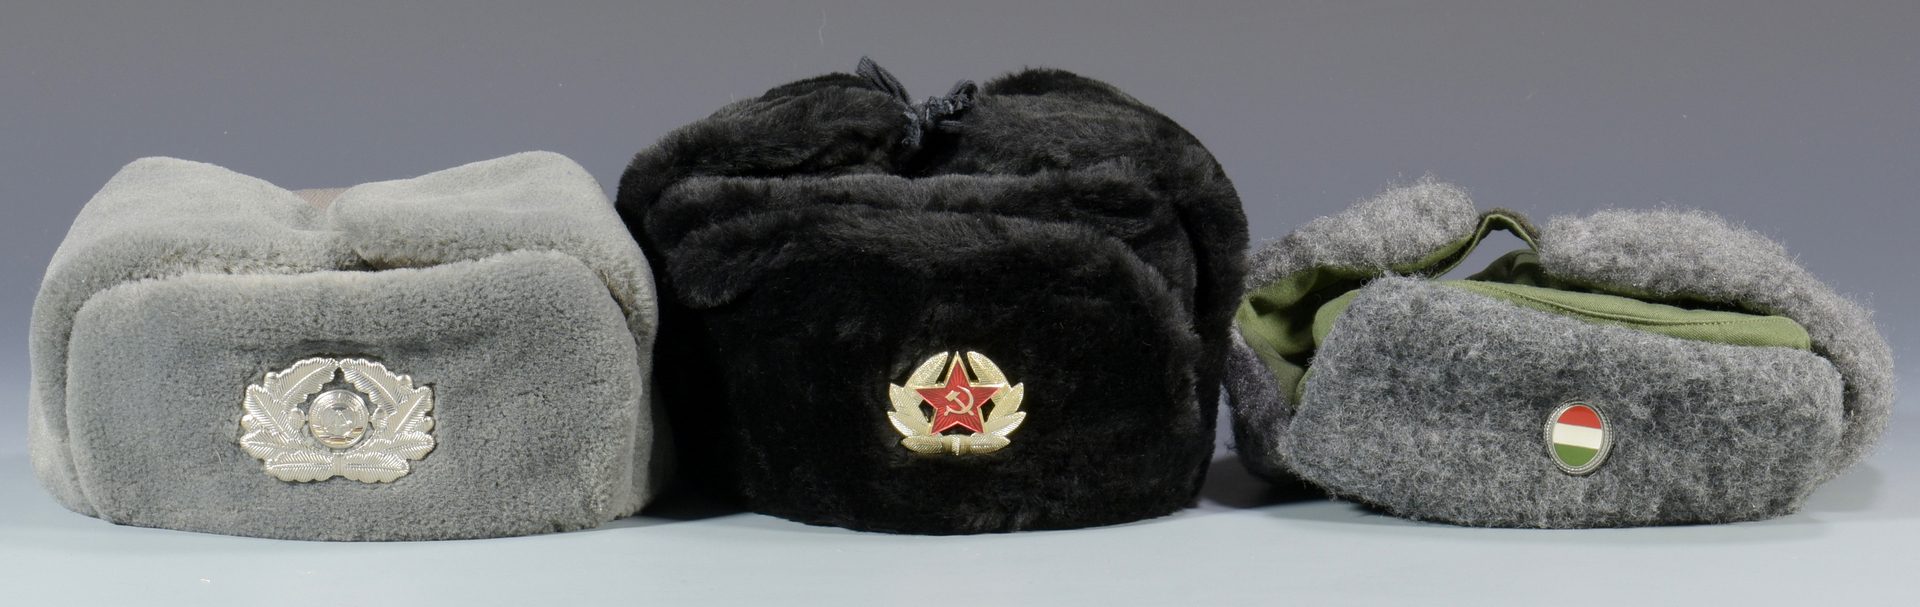 Lot 879: Armed Forces Cap Collection